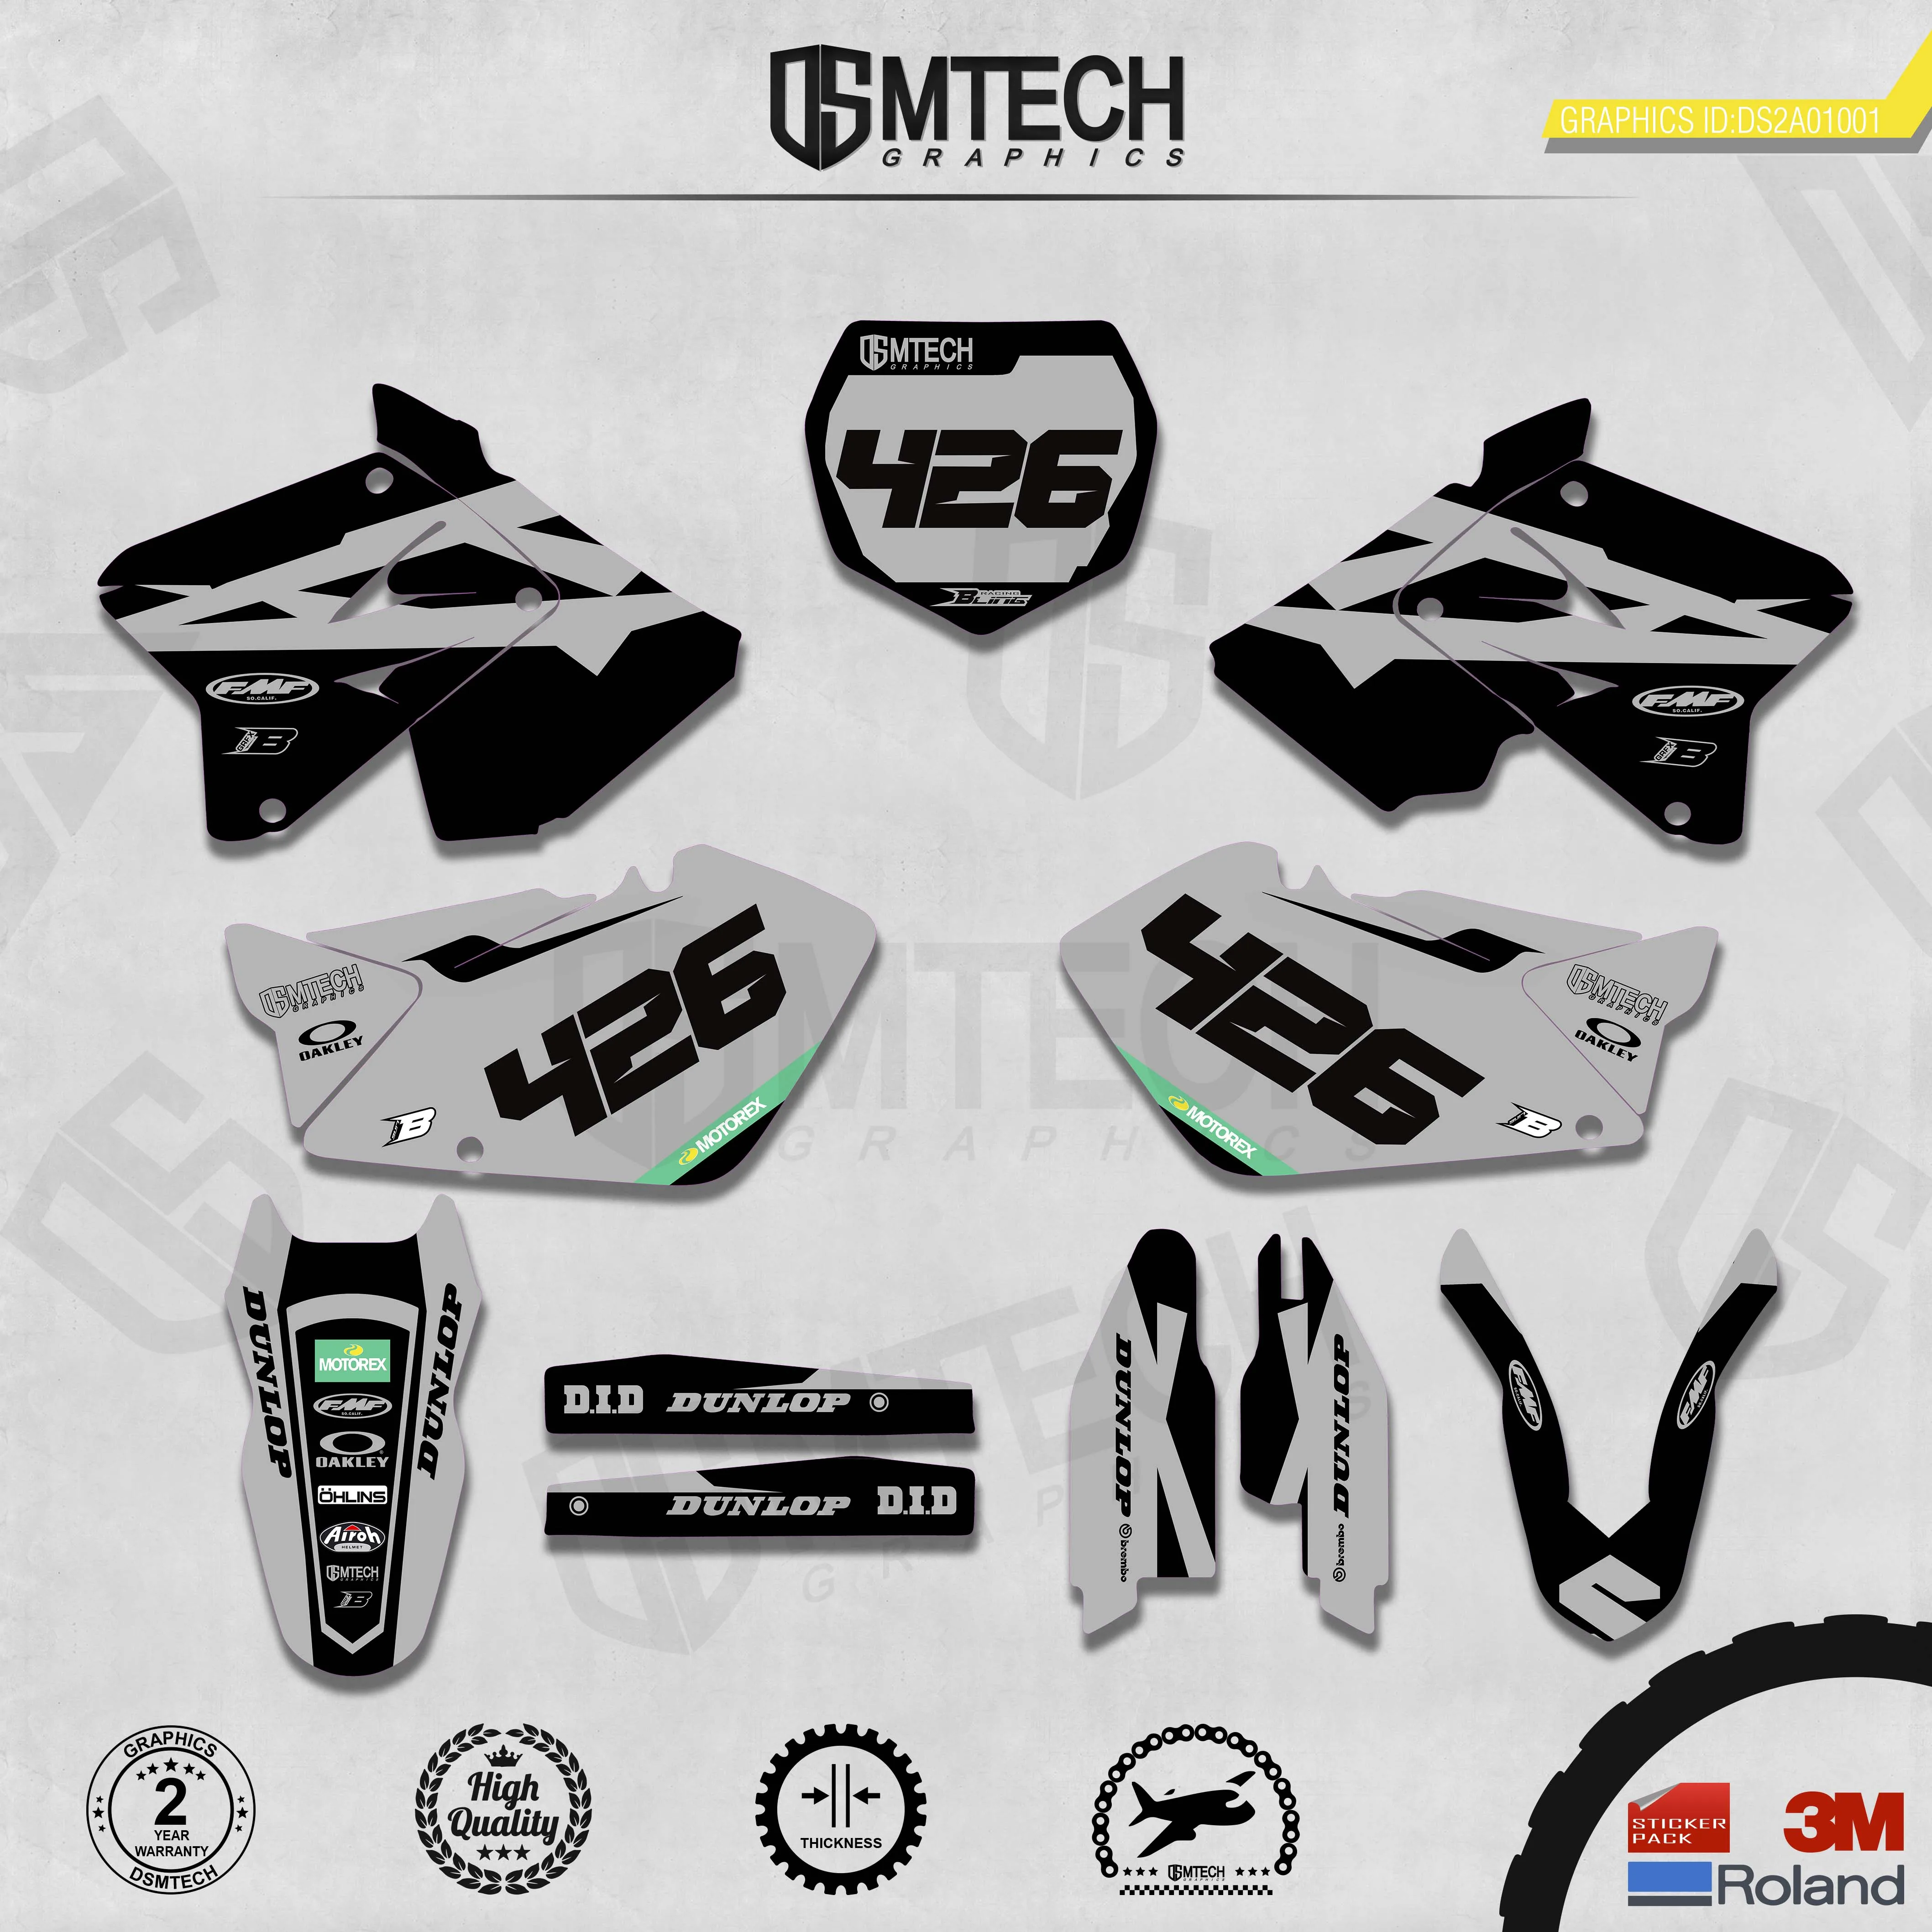 DSMTECH Customized Team Graphics Backgrounds Decals 3M Custom Stickers For 2001-2004  2005-2008  2009-2012 RM125-250  001